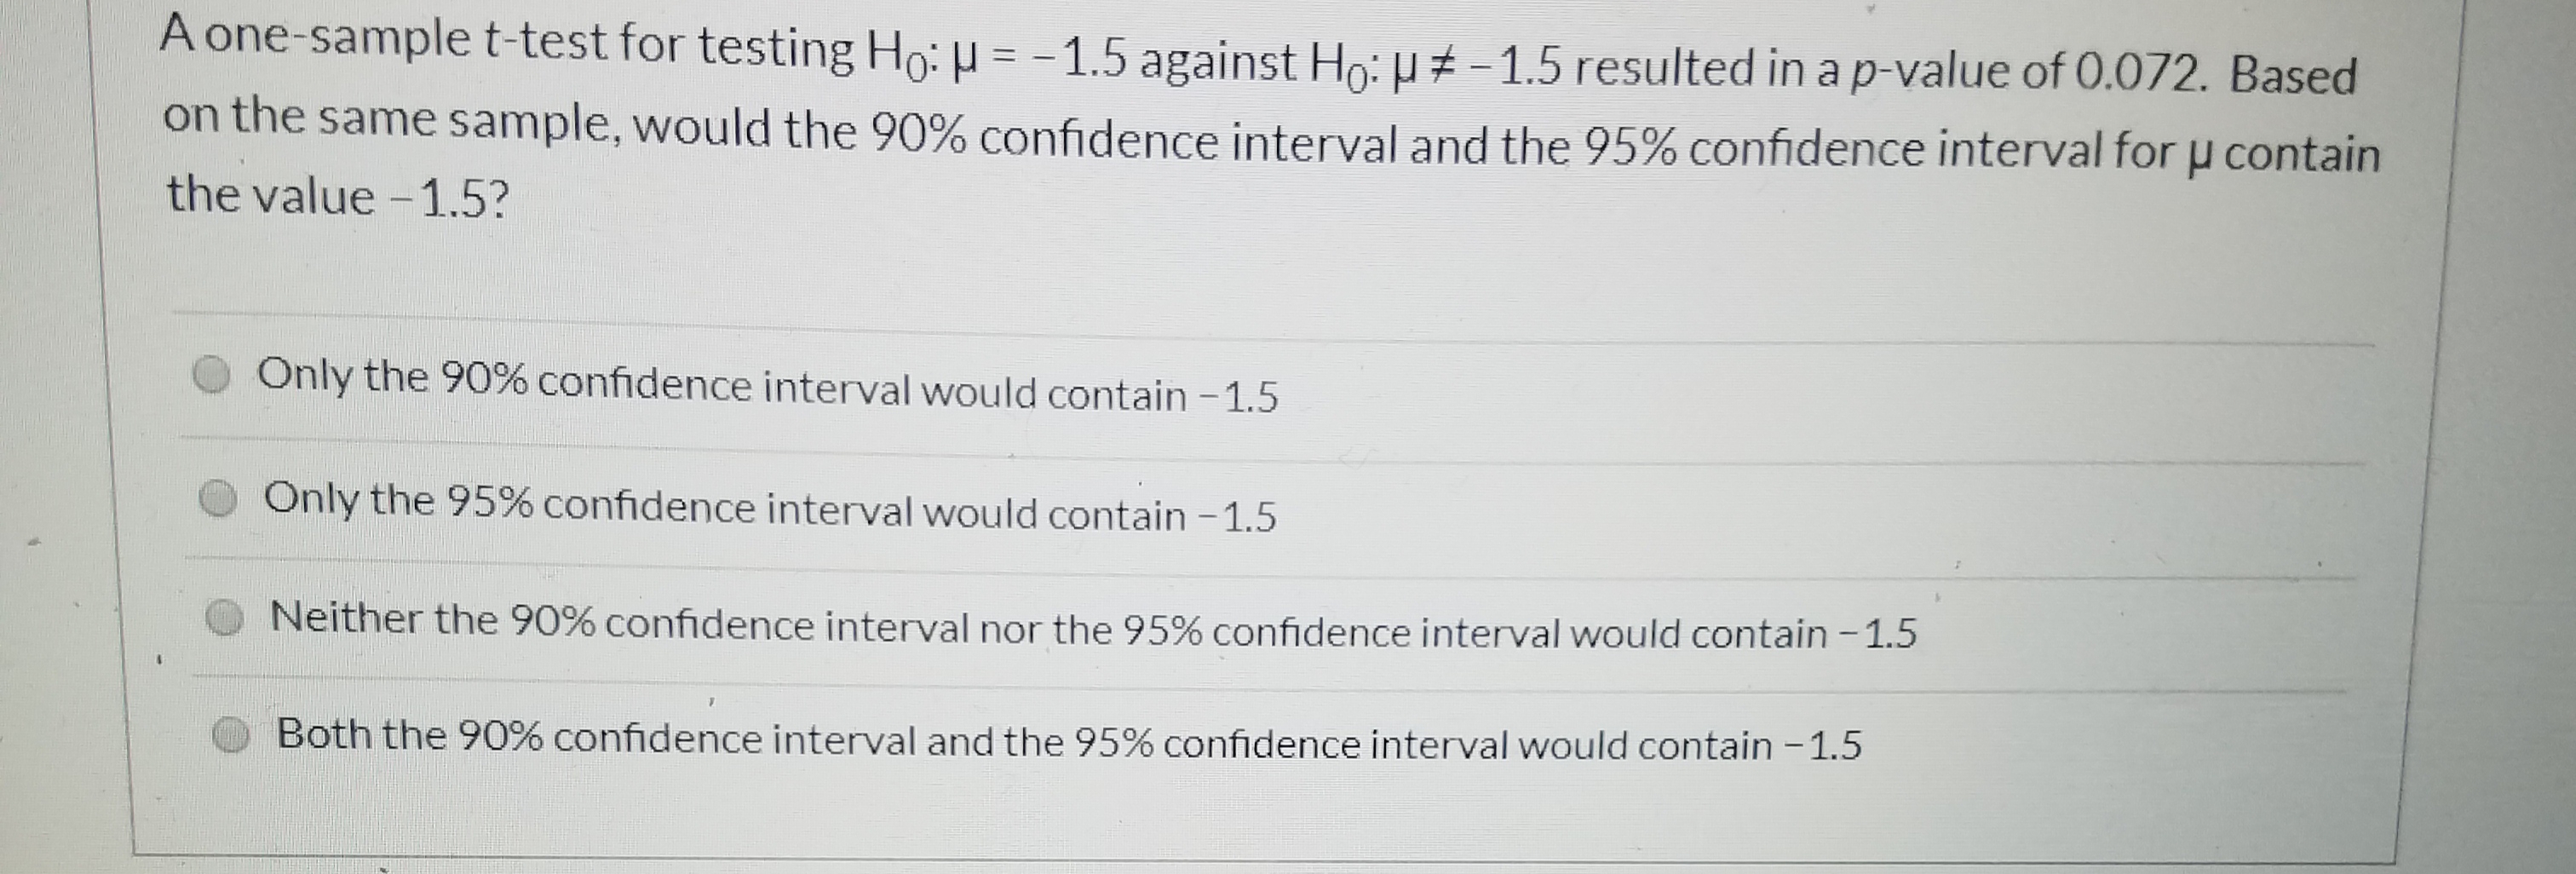 A one-sample t-test for testing Ho: = - 1.5 against Ho: H # - 1.5 resulted in a p-value of 0.072. Based
on the same sample, would the 90% confidence interval and the 95% confidence interval for u contain
the value -1.5?
Only the 90% confidence interval would contain -1.5
Only the 95% confidence interval would contain -1.5
Neither the 90% confidence interval nor the 95% confidence interval would contain -1.5
1.
Both the 90% confidence interval and the 95% confidence interval would contain -1.5
